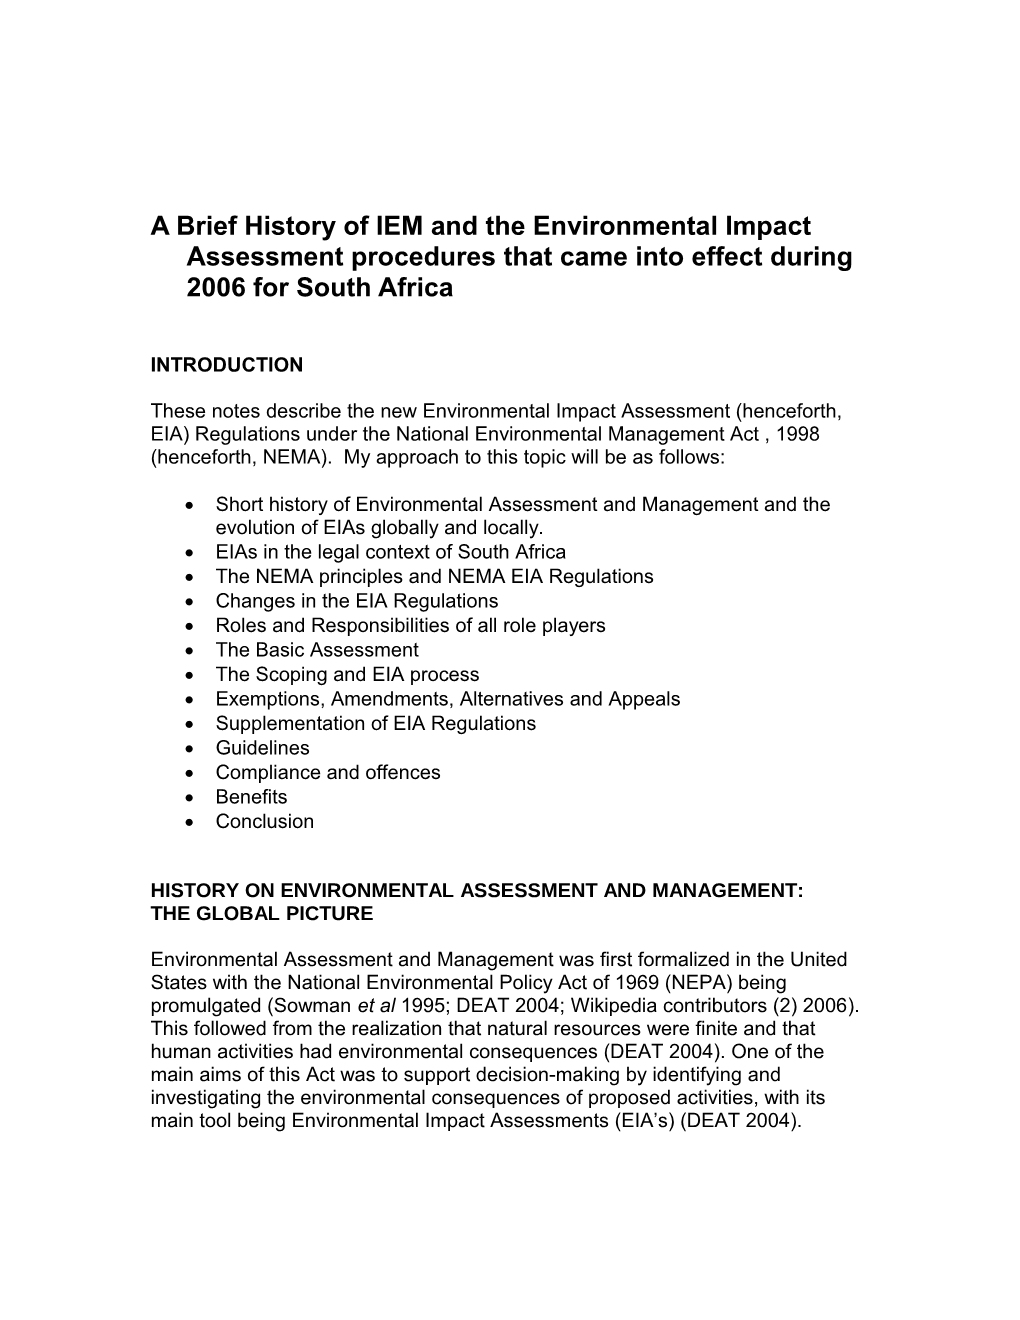 A Brief History of IEM and the Environmental Impact Assessment Procedures That Came Into